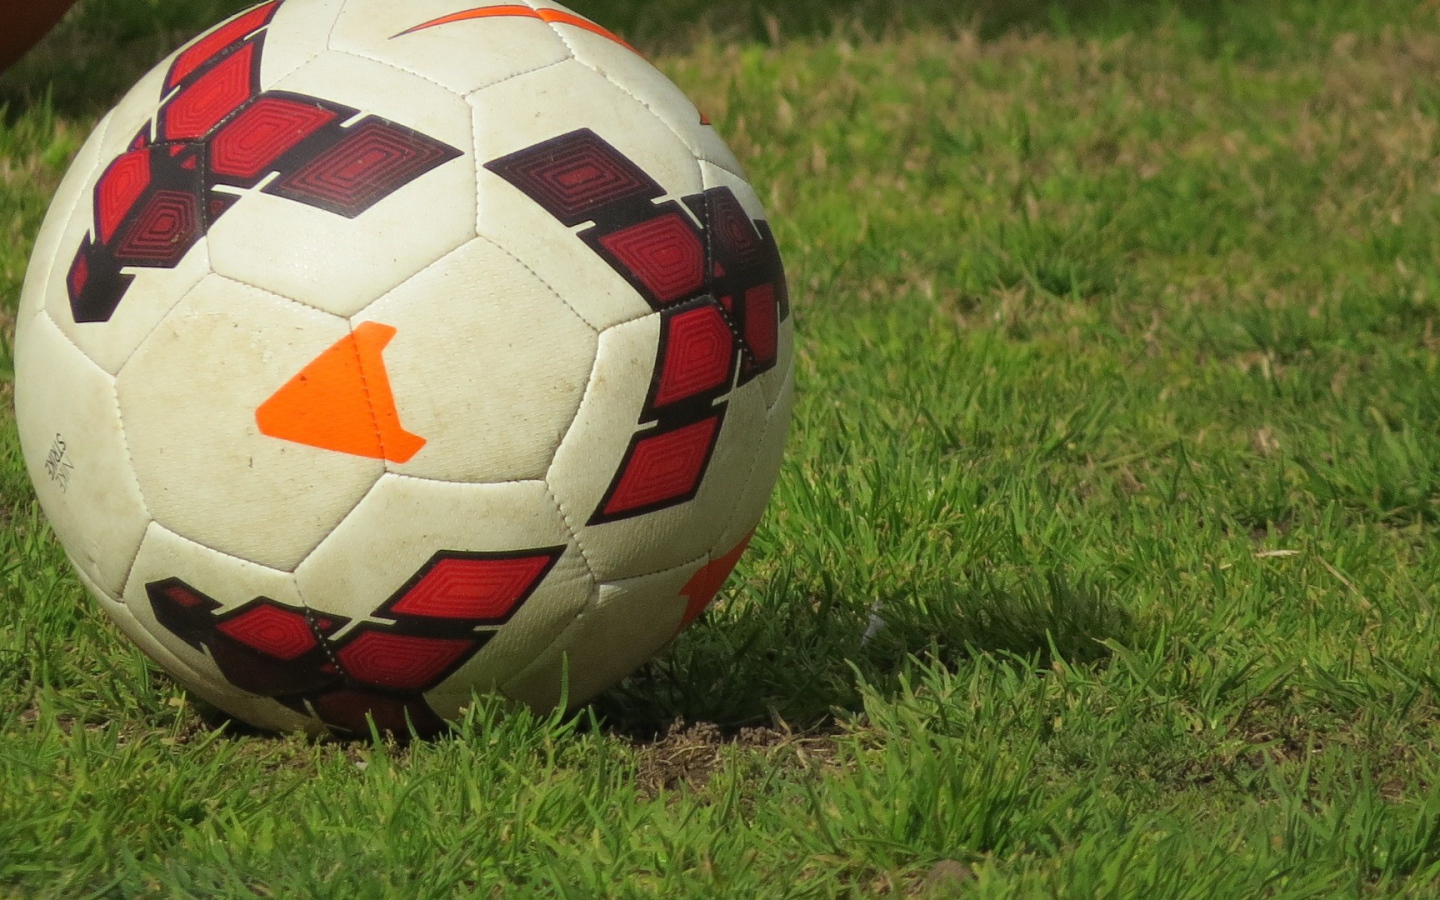 Soccer ball on a lawn